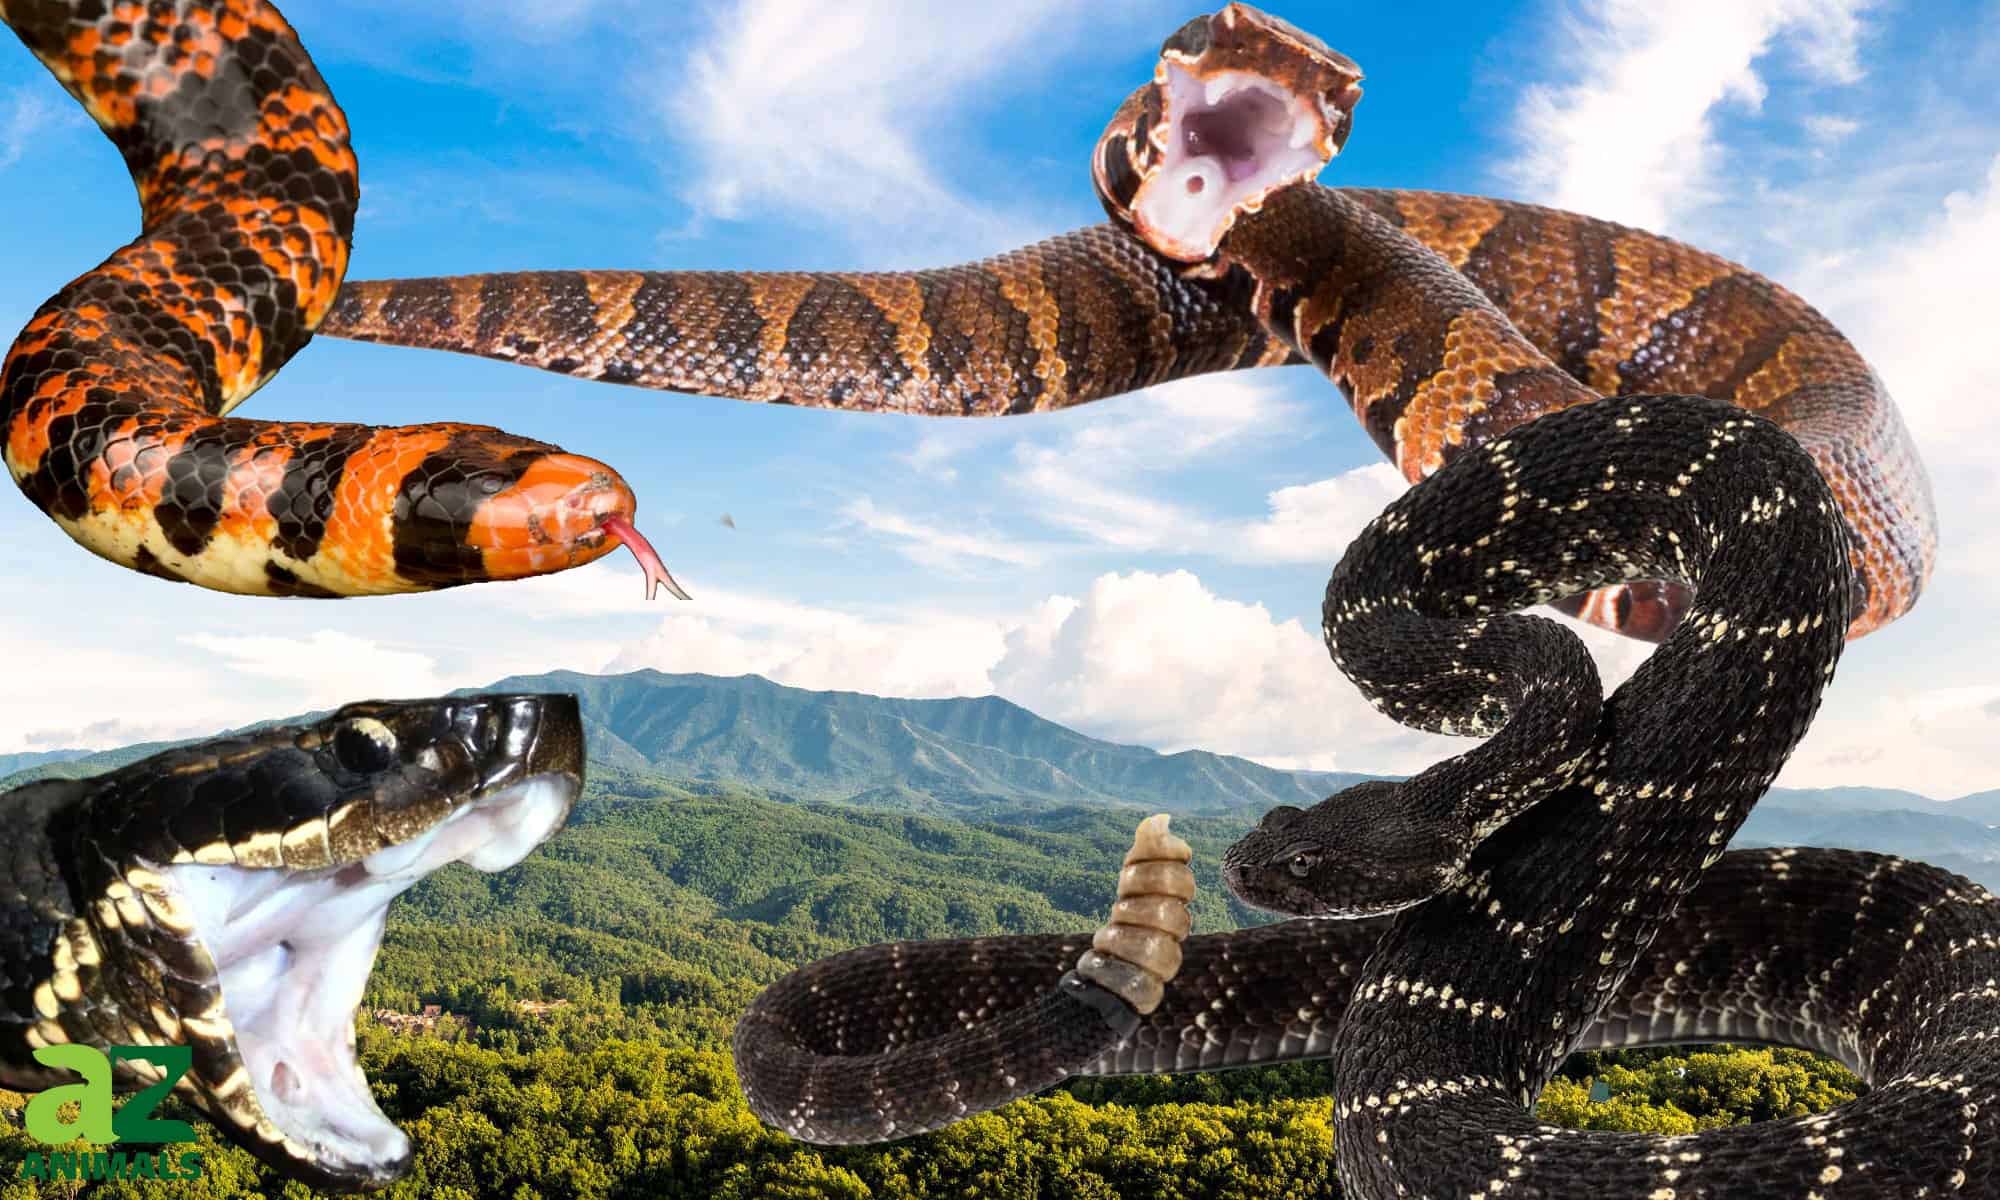 snakes species collage